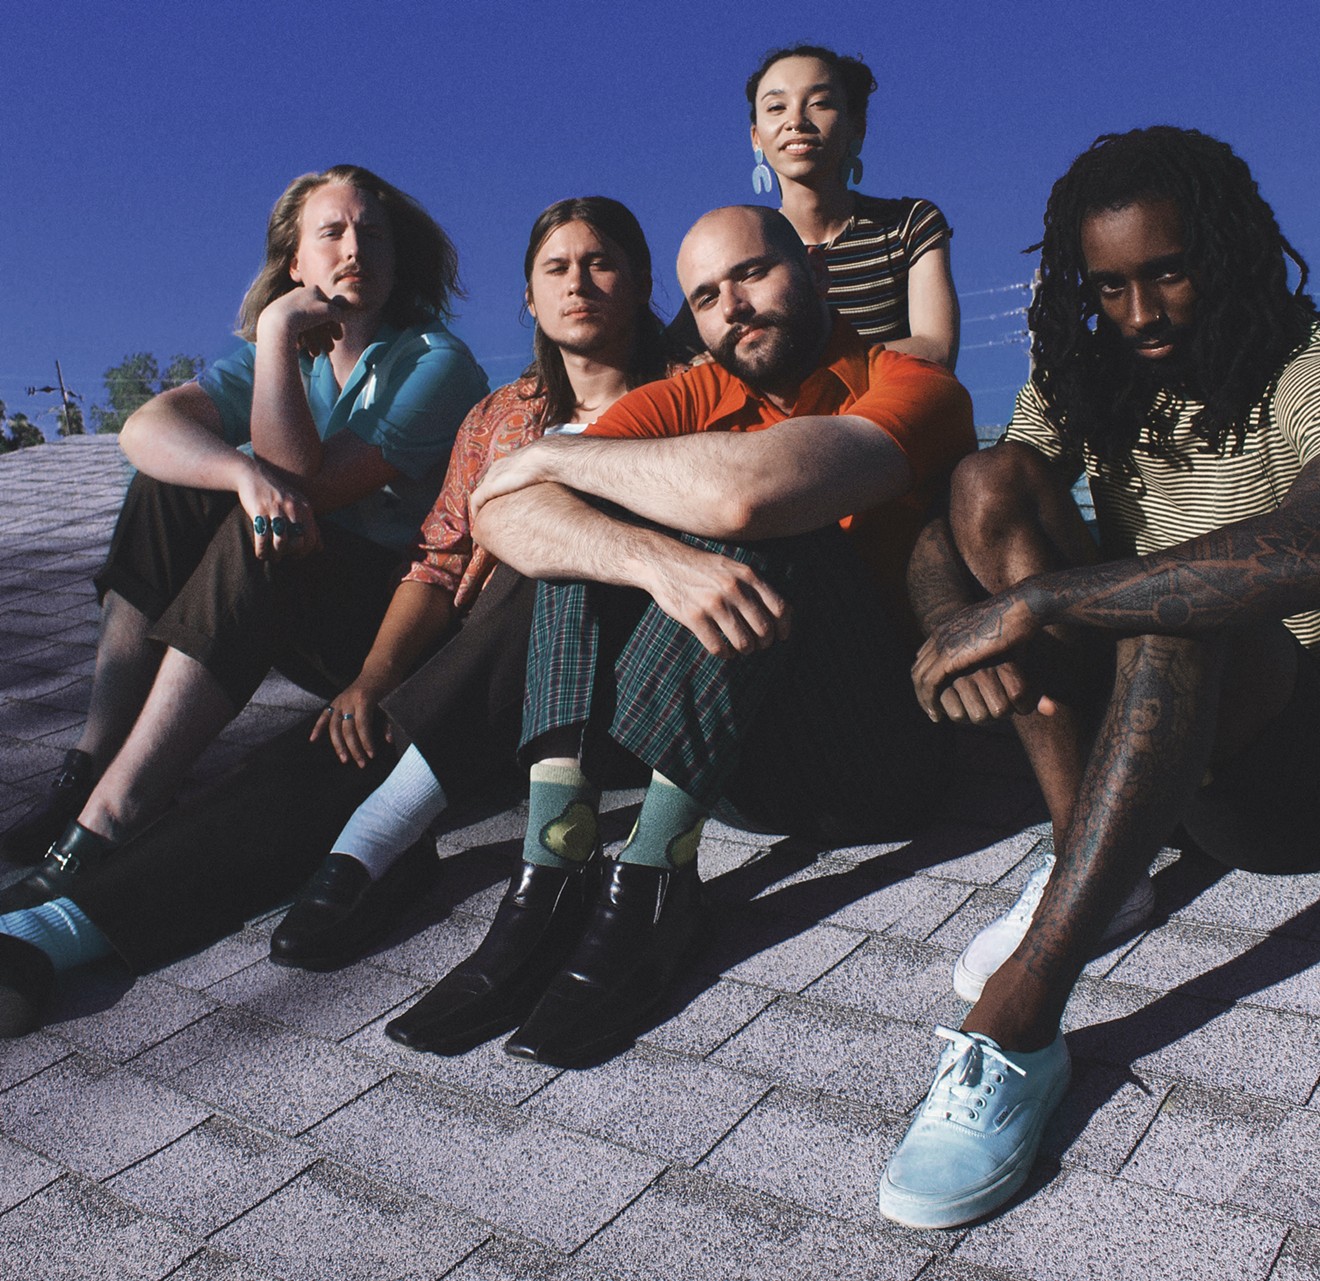 Pariah Pete (second from left) poses alongside his band The Mercuries (from left): Gus Campbell, Jacob Unterreiner, Carly Bates and Malik Nelson.